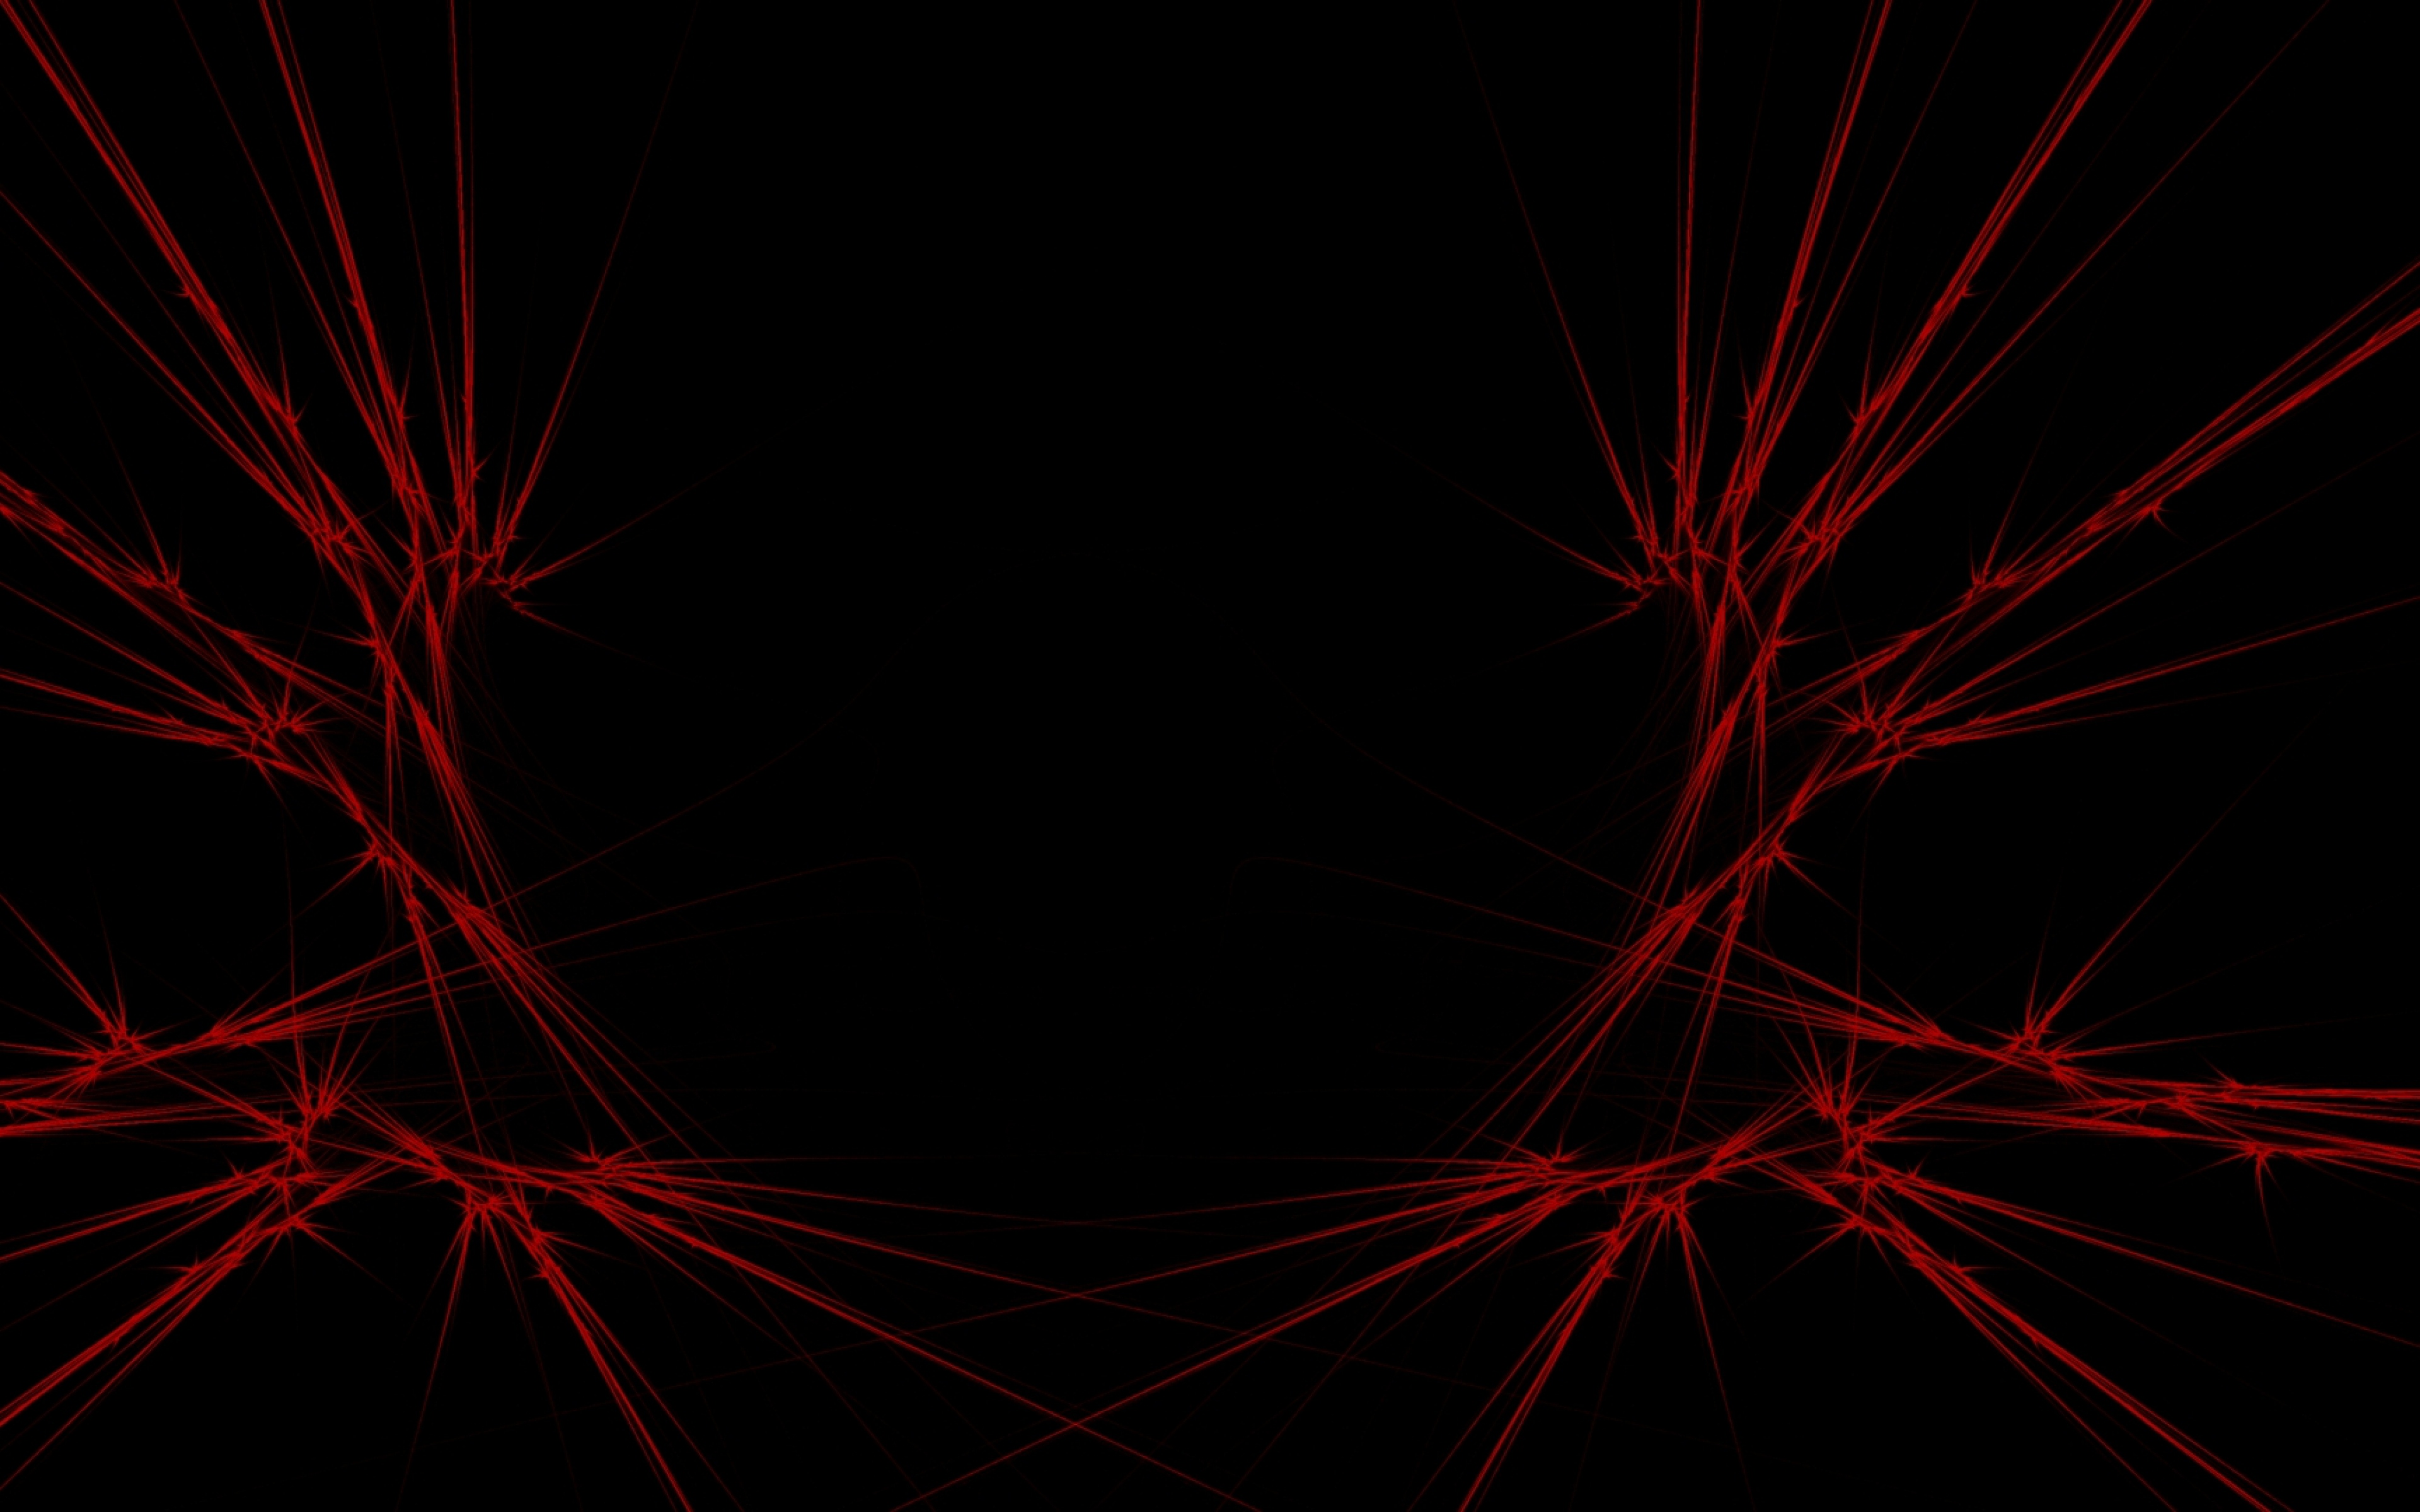  Wallpaper 3840x2400 red black abstract Ultra HD 4K HD Background 3840x2400